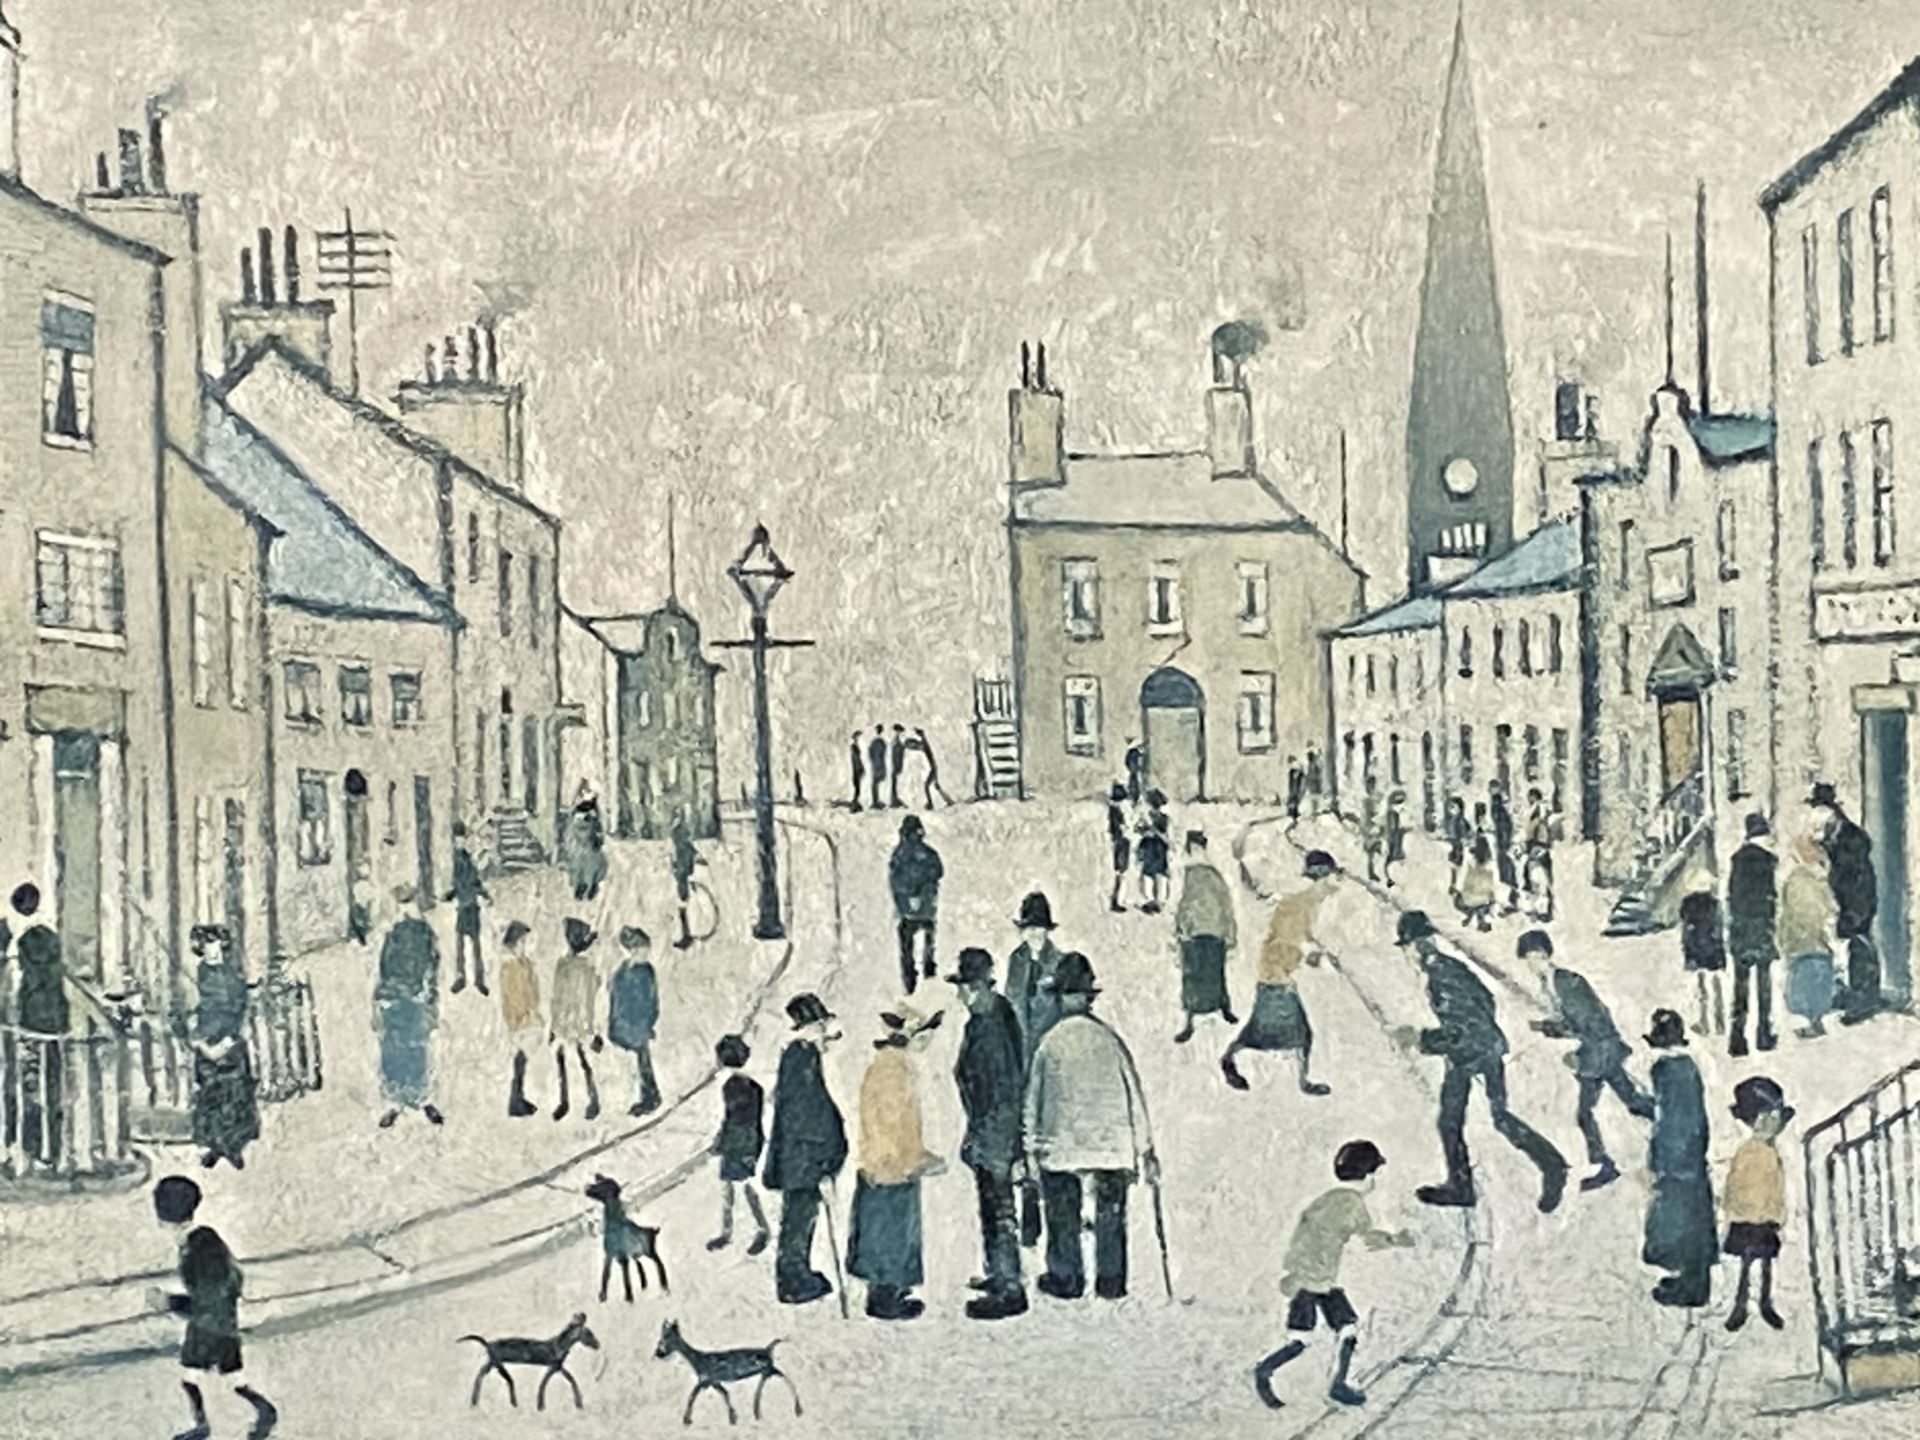 FG lithographic print by L S Lowry